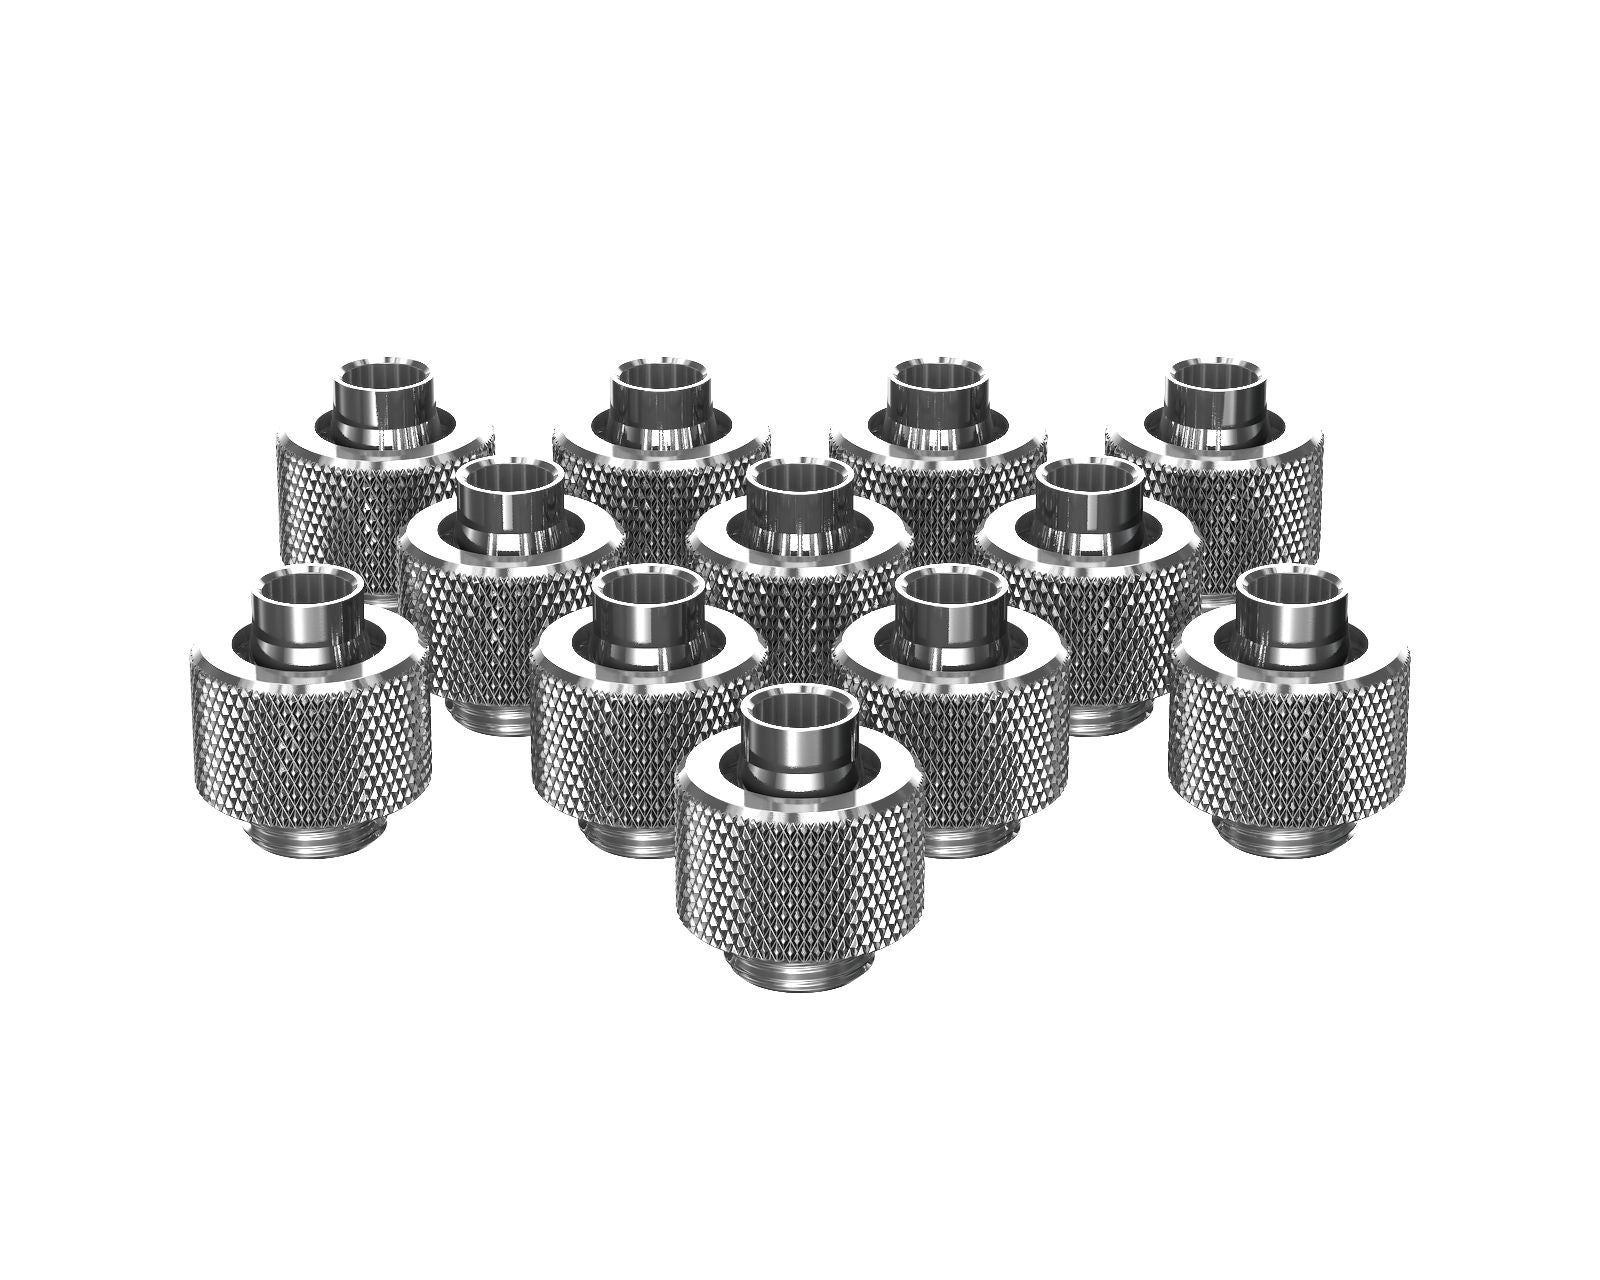 PrimoChill SecureFit SX - Premium Compression Fitting For 3/8in ID x 1/2in OD Flexible Tubing 12 Pack (F-SFSX12-12) - Available in 20+ Colors, Custom Watercooling Loop Ready - Silver Nickel